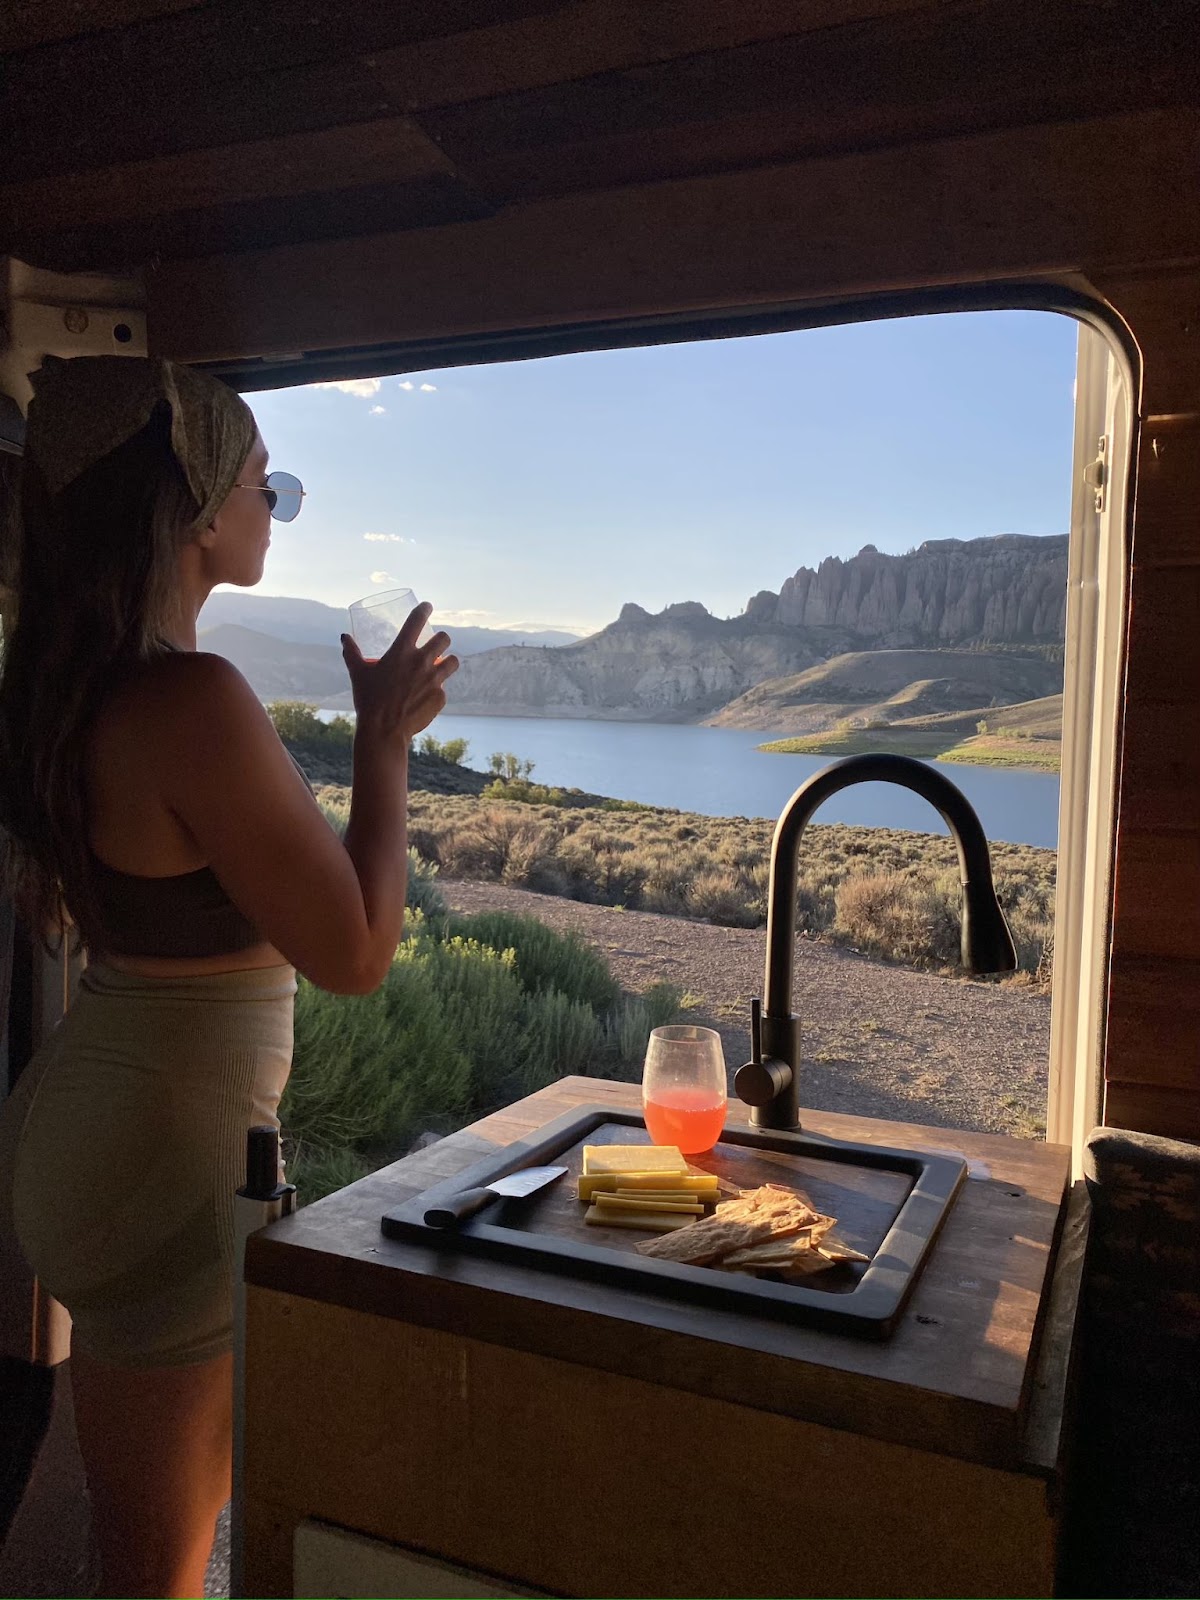 Campervan window view with mountains